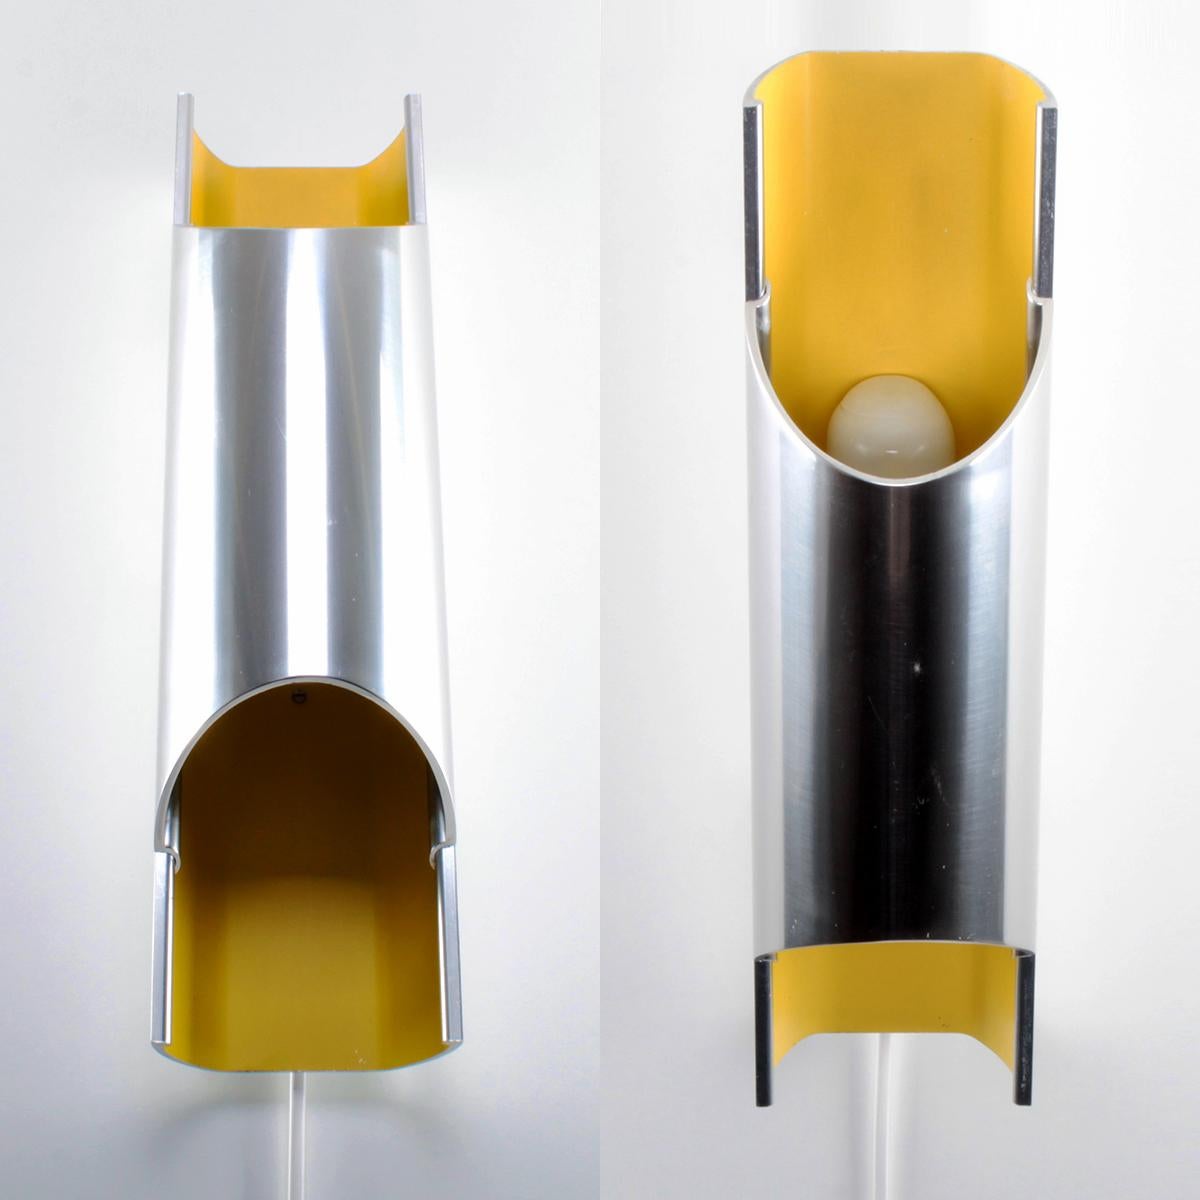 Pandean Aluminum and Yellow Sconce by Bent Karlby for Lyfa in 1970 (Skandinavische Moderne)